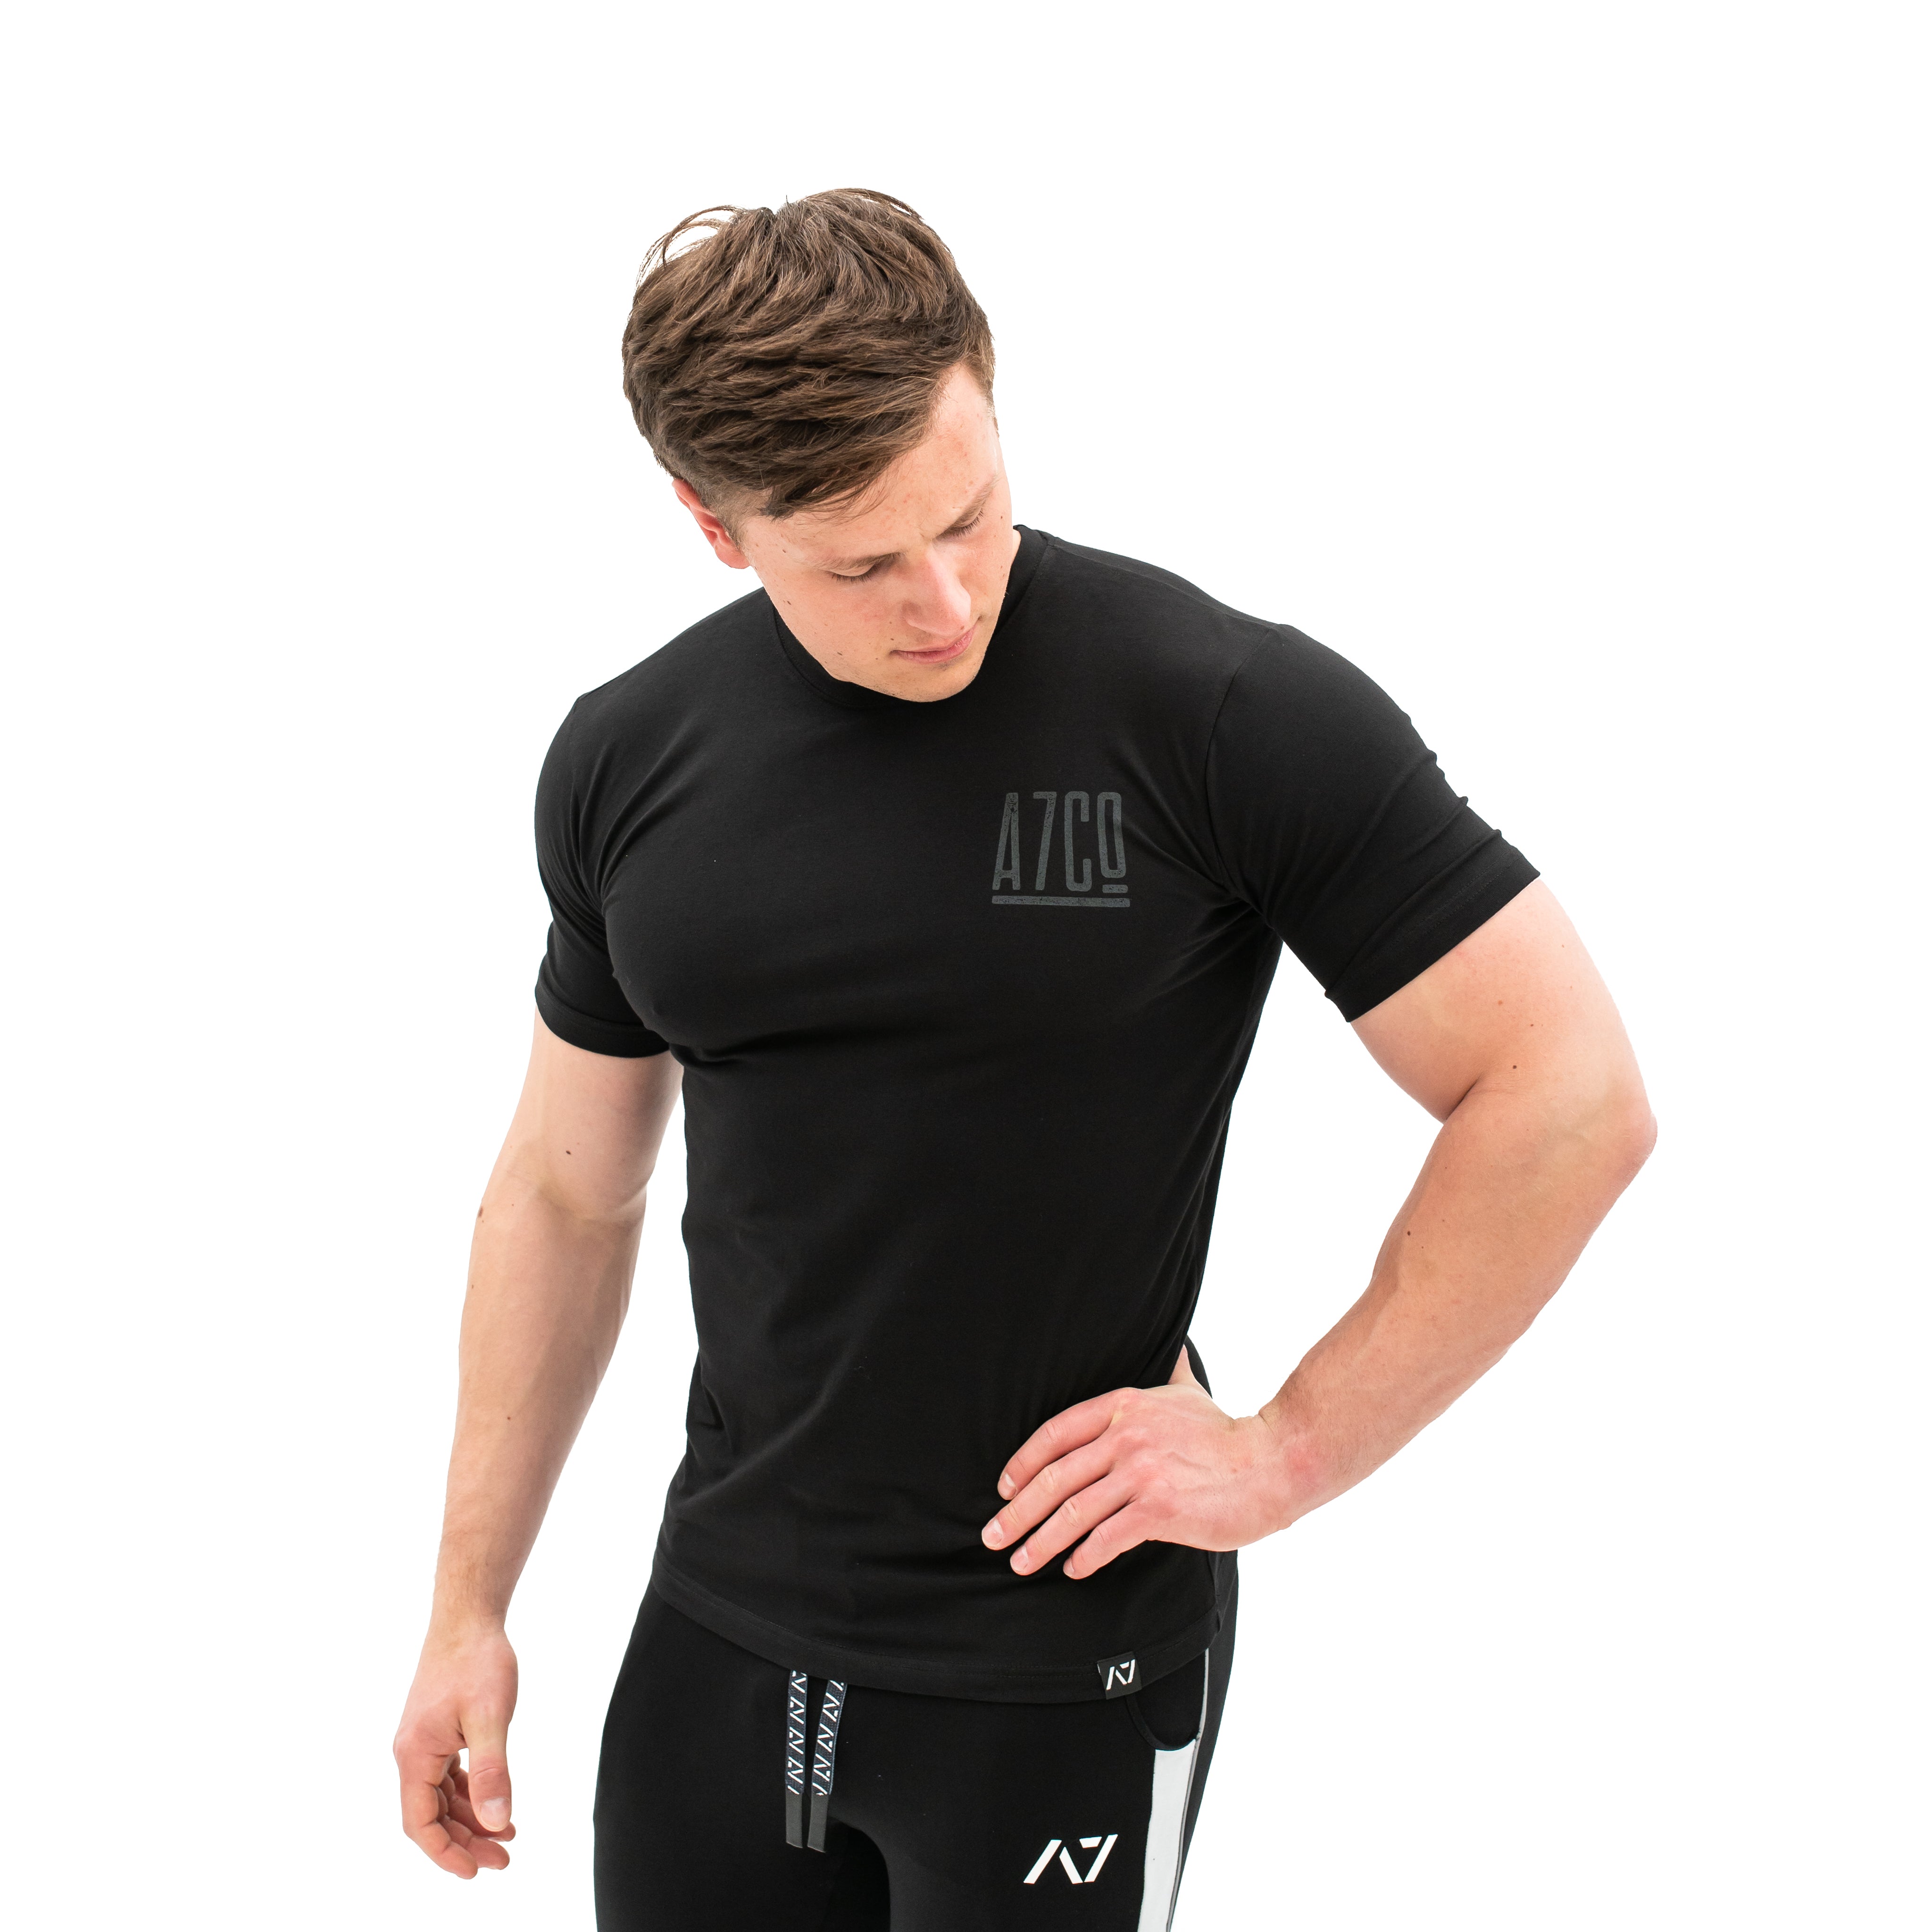 Arched Non Bar Grip T-Shirt is perfect for in and out of the gym. Purchase Arched Non Bar Grip tshirt UK from A7 UK. Purchase Arched Shirt Europe from A7 UK. Best gymwear shipping to UK and Europe from A7 UK. Arched is our newest Non Bar Grip Design. The best Powerlifting apparel for all your workouts. Available in UK and Europe including France, Italy, Germany, Sweden and Poland.